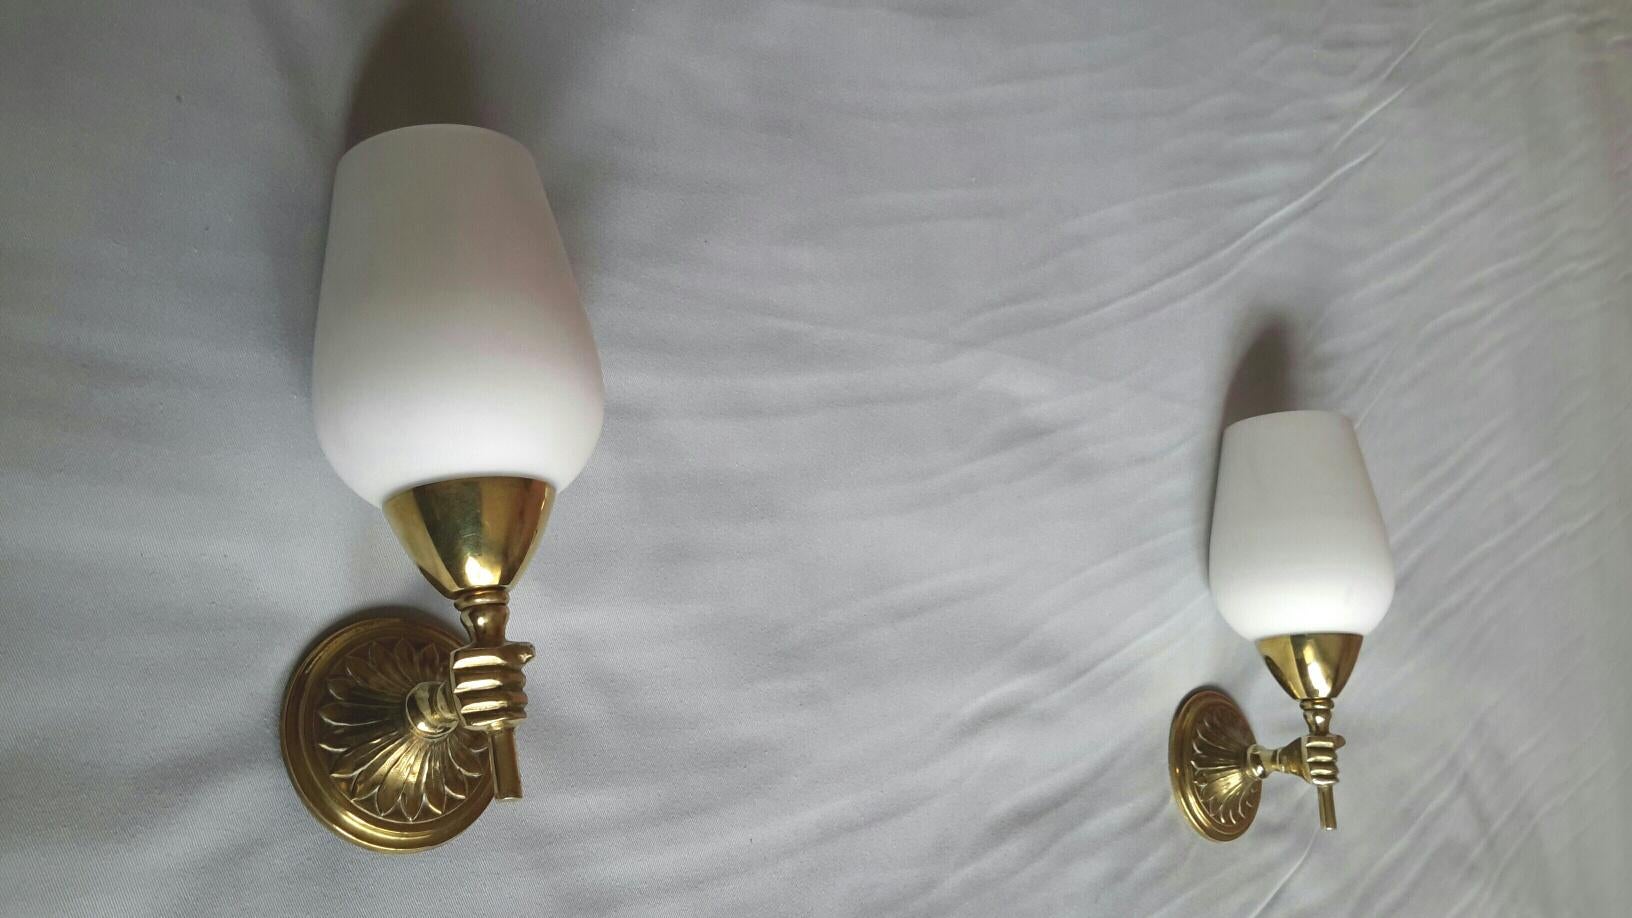 Charming original pair of neoclassical bronze sconces with white opaline lampshades tulips and figuring small hands torchere holding it in the style of the French Maison Jansen, France, circa 1950.
In a very good condition, rewired to fit the US